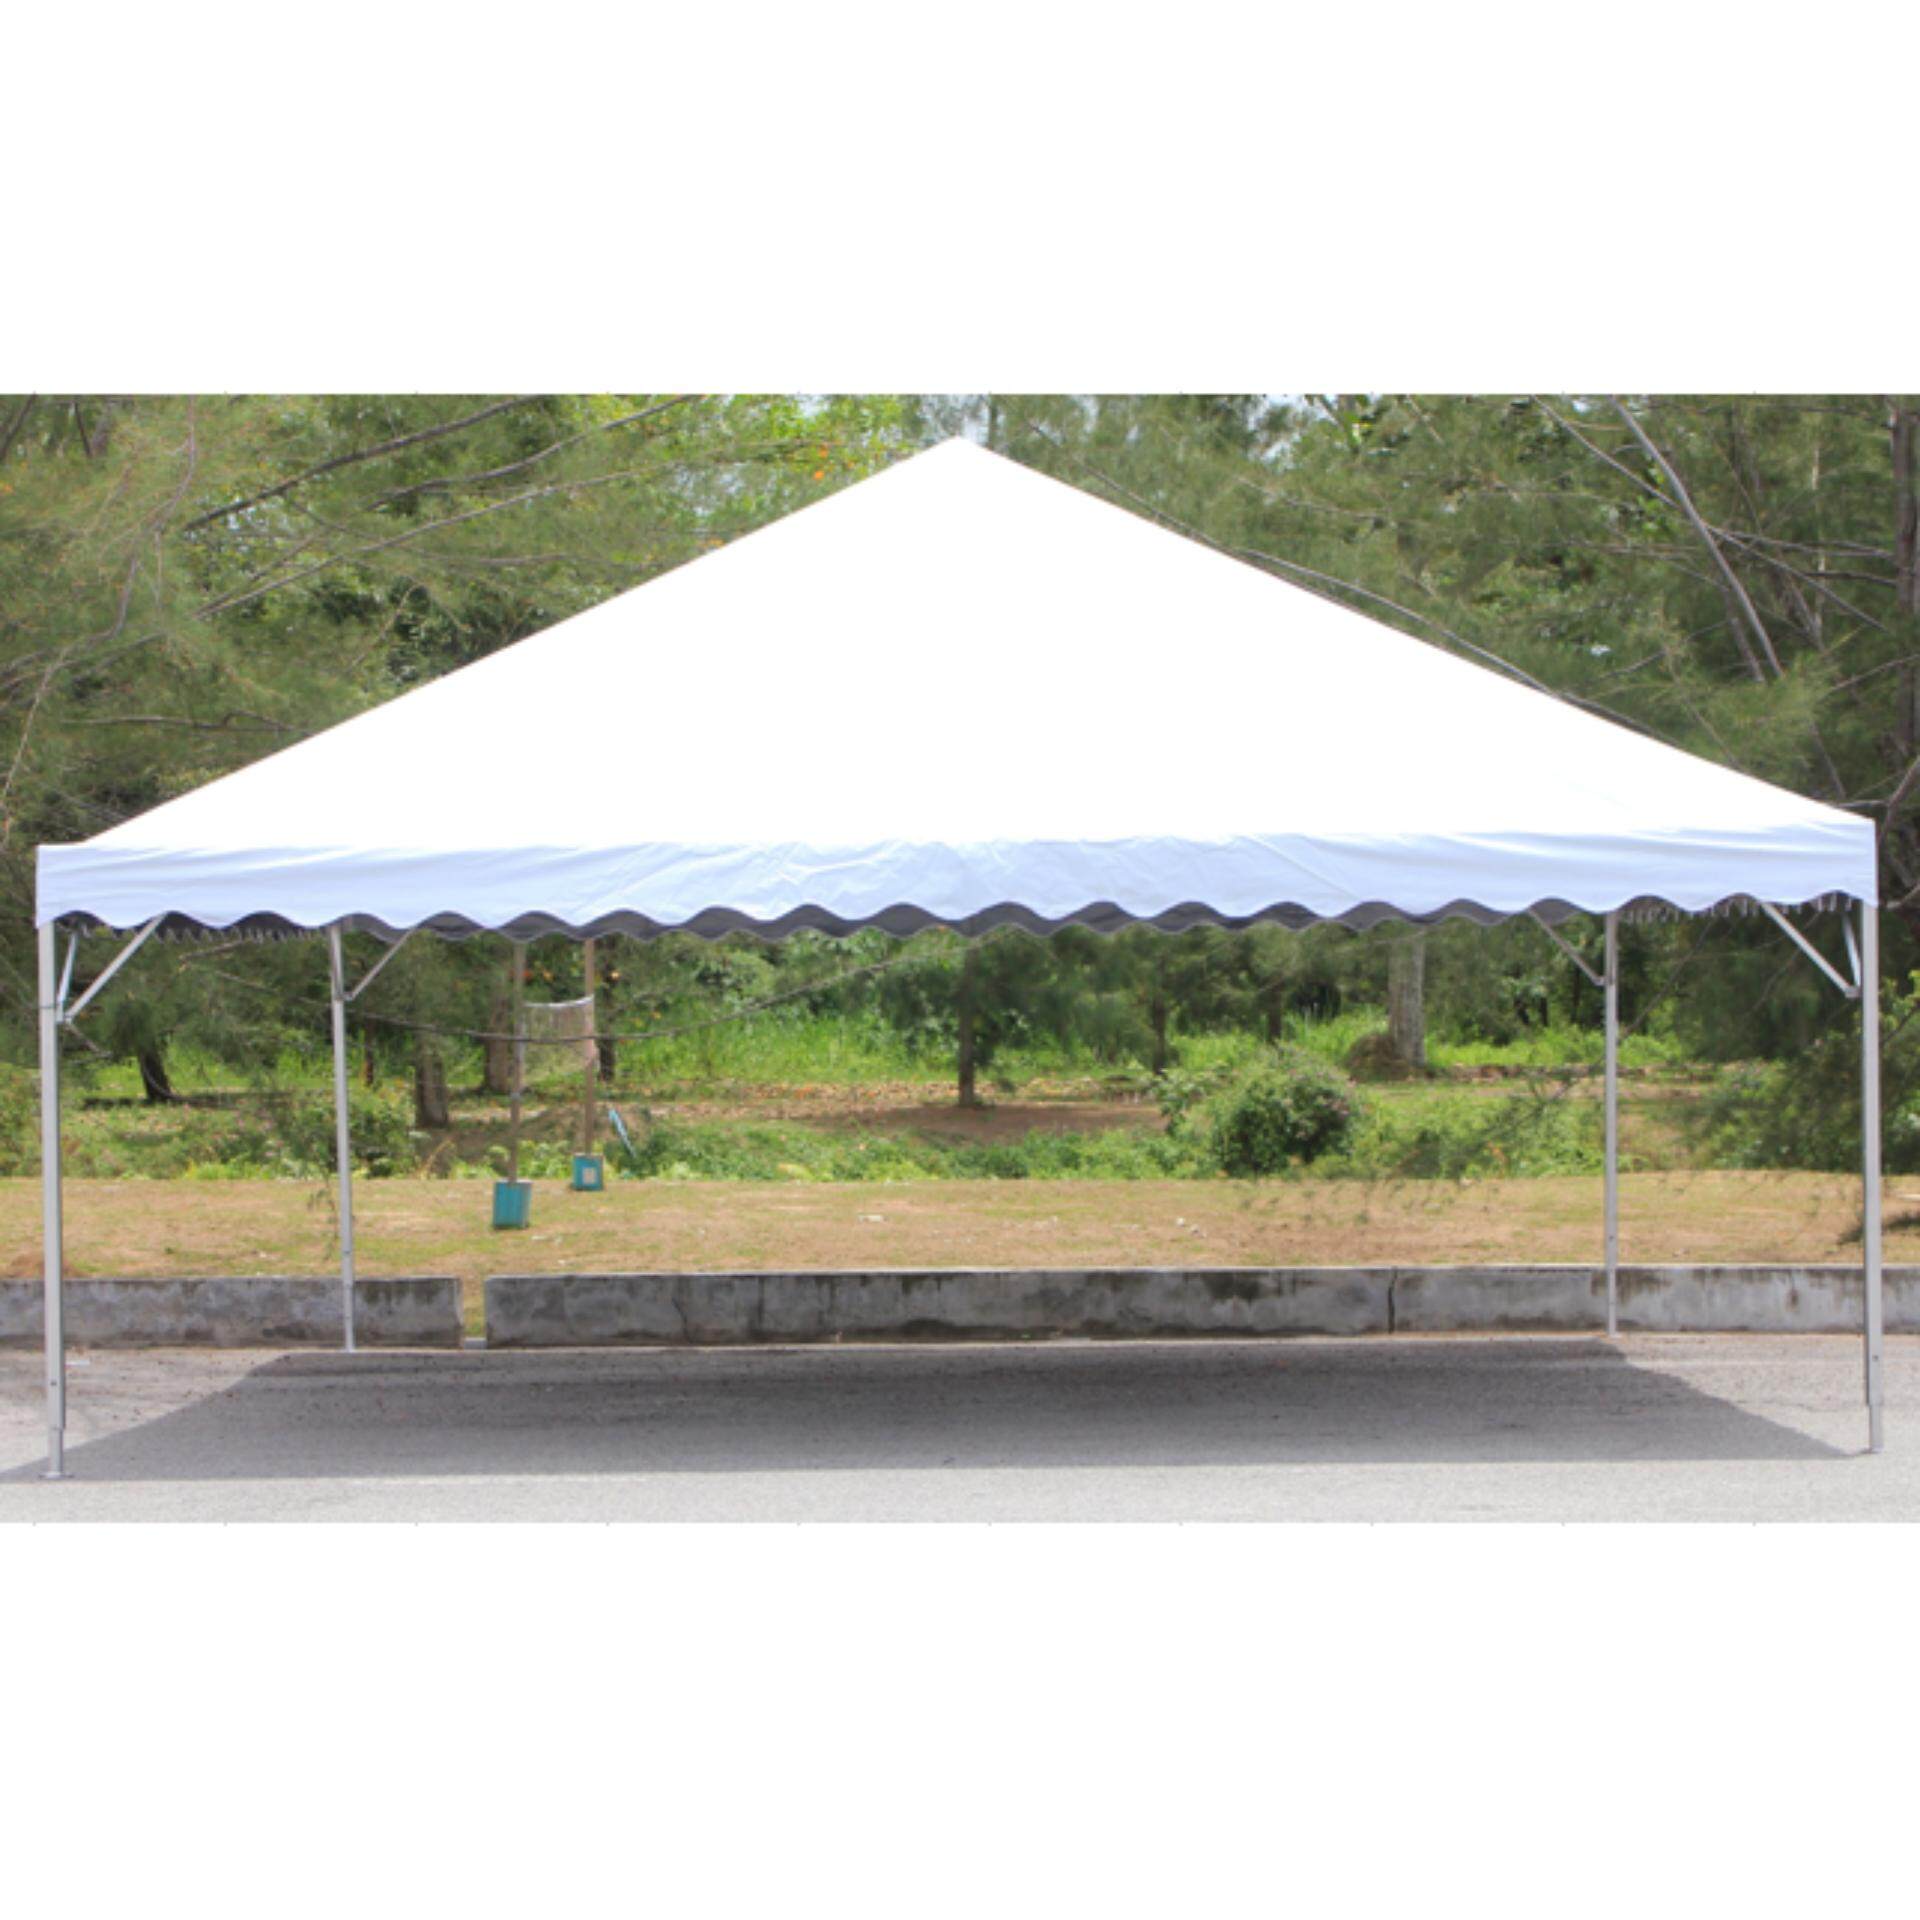 Pyramid 20 X 20 Canopy Tent Commercial Banquet Event Function Fair